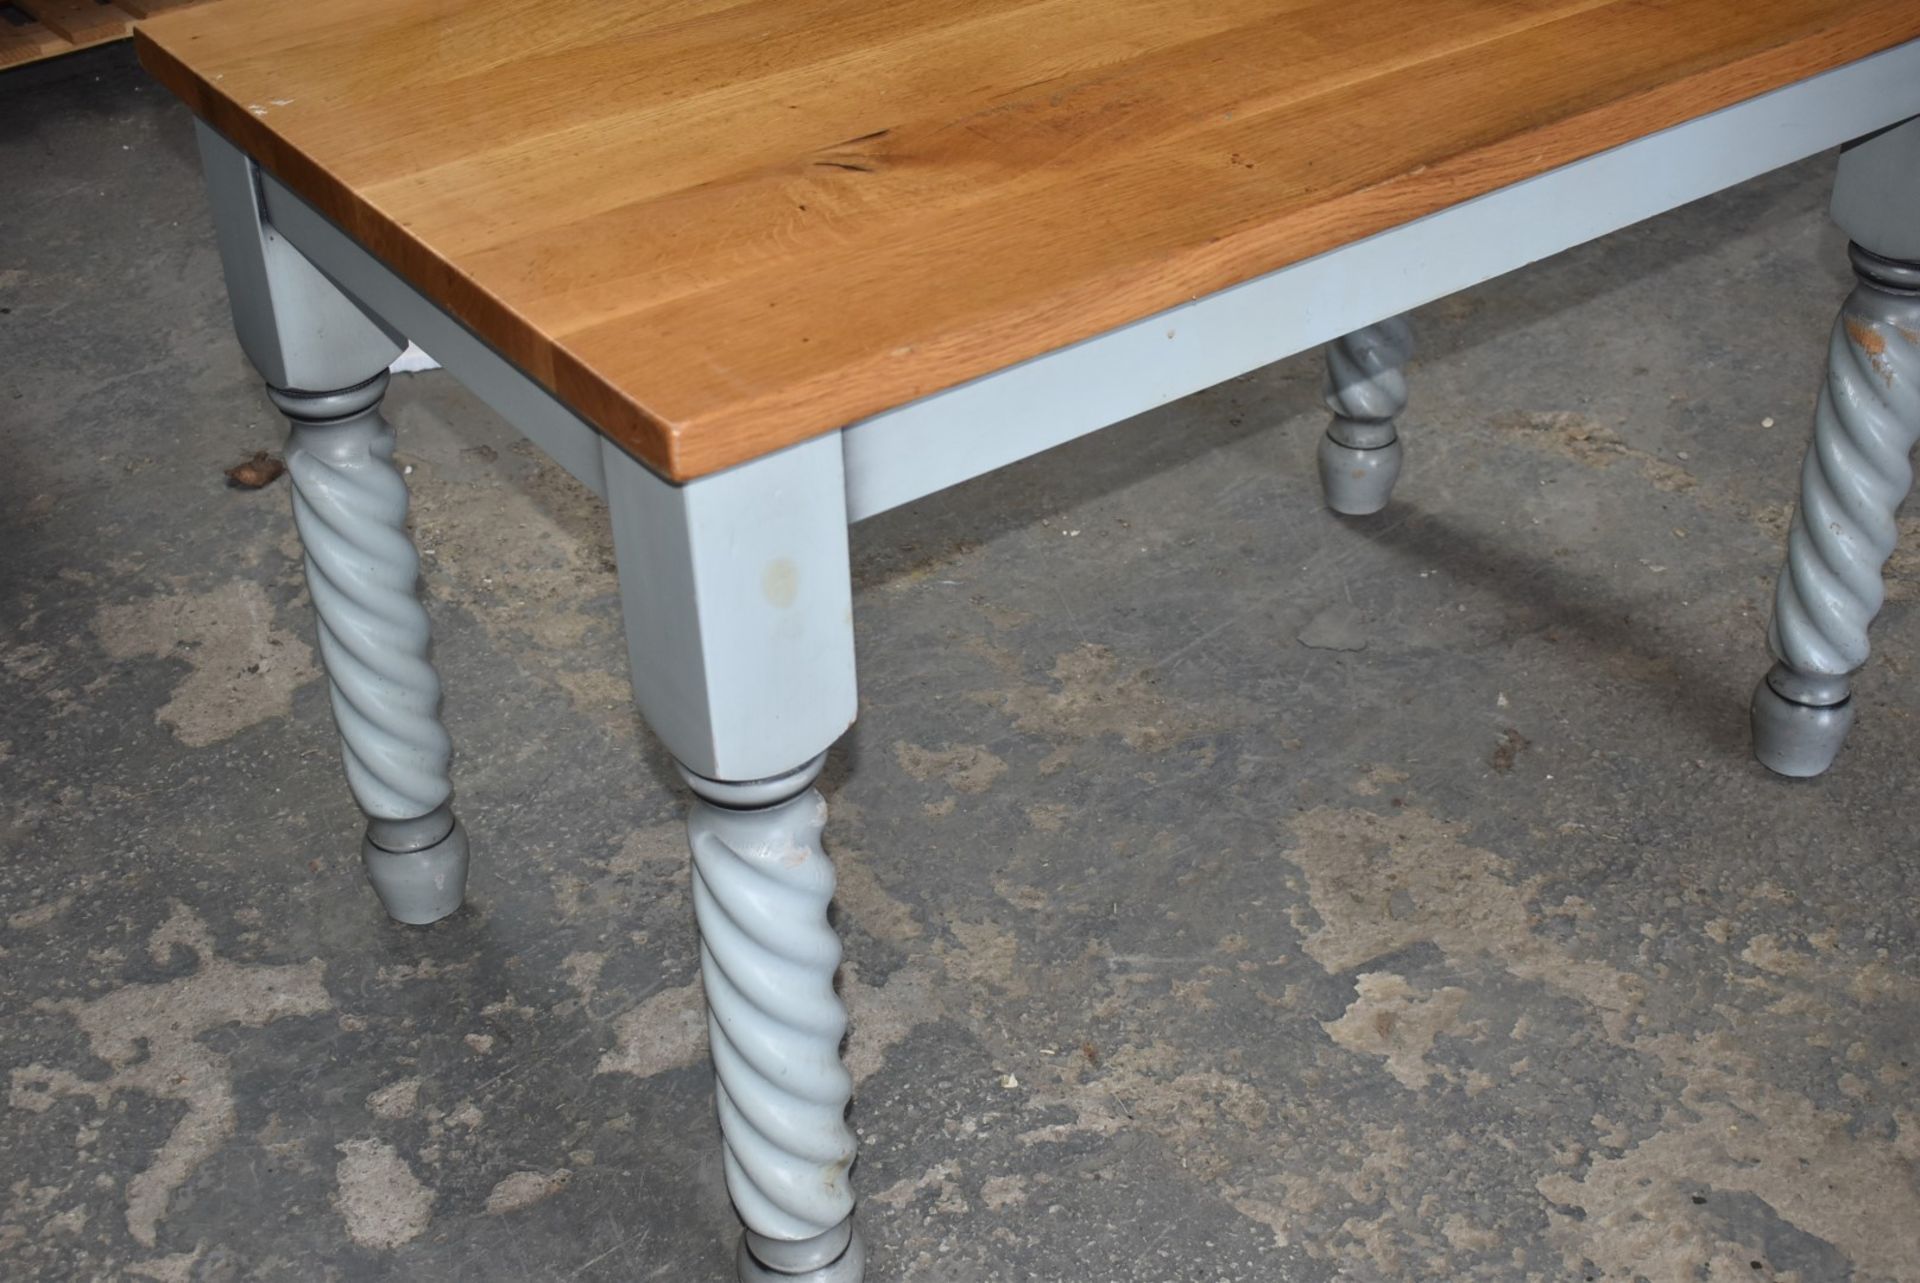 1 x Solid Wood Farmhouse Country Style Kitchen Dining Table With Barley Twist Legs and Two Tone - Image 6 of 6